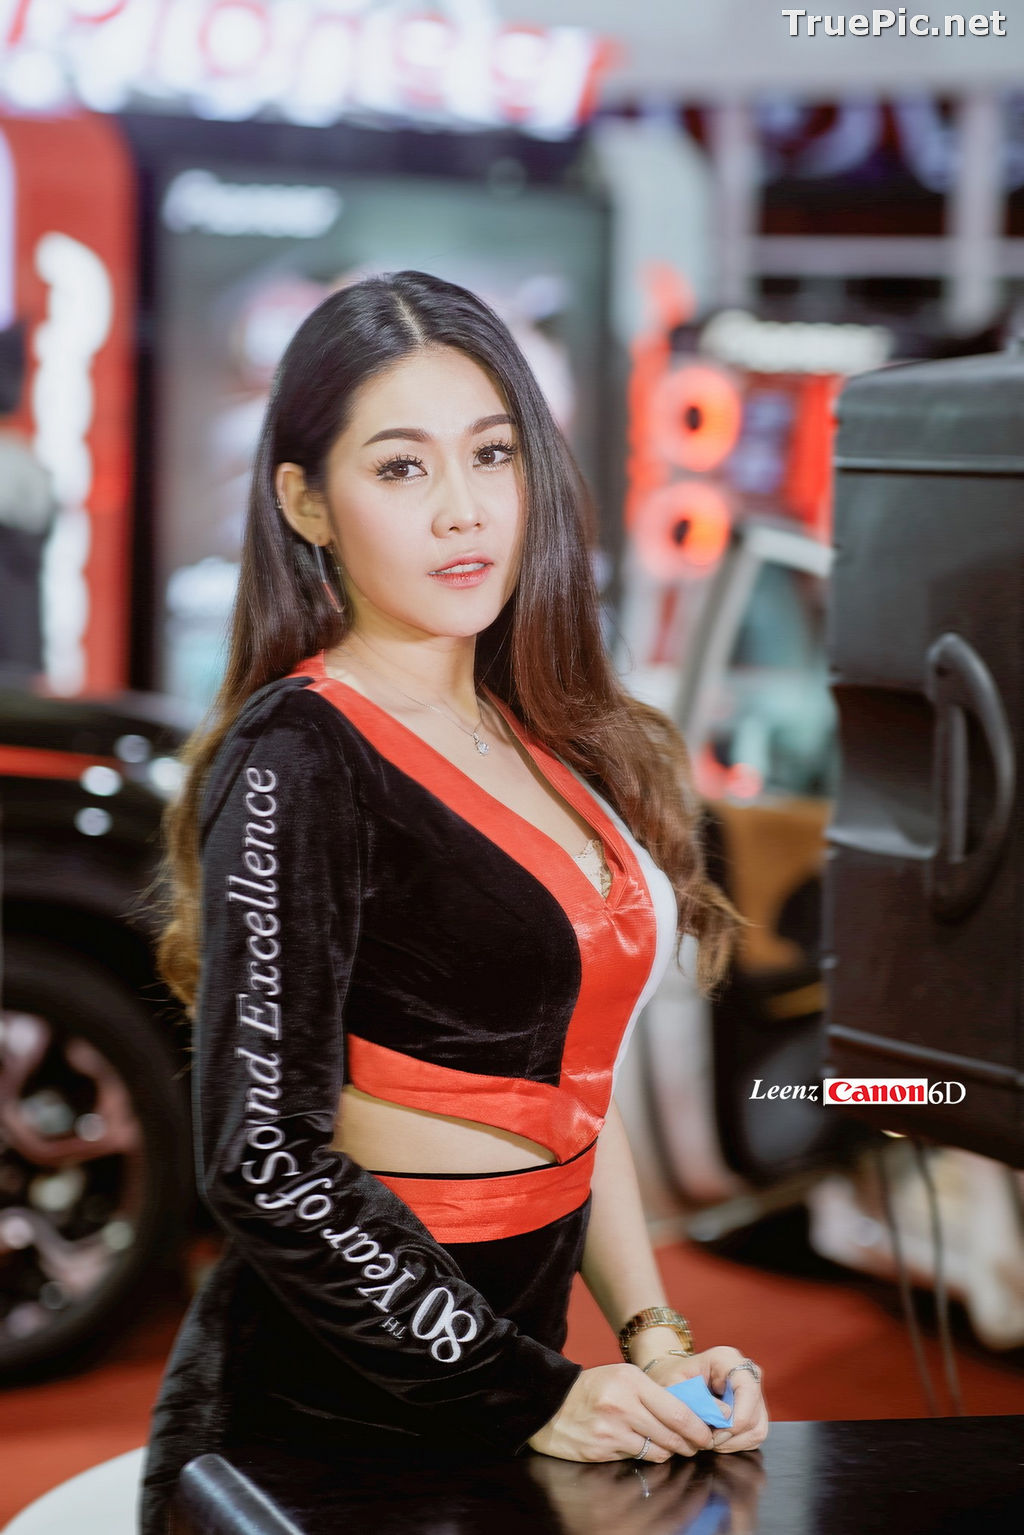 Image Thailand Racing Model - Thailand Showgirl Model Collection #1 - TruePic.net - Picture-40